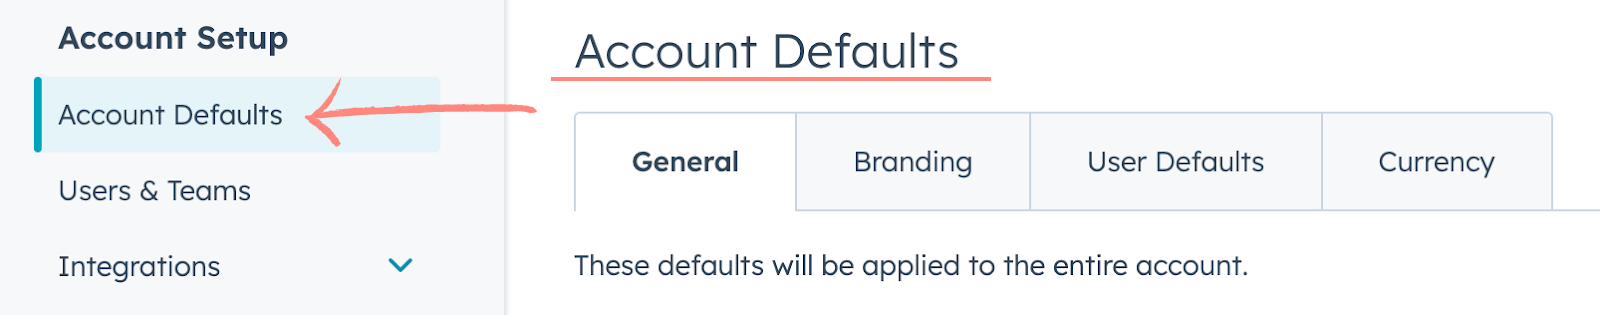 How to HubSpot - Account Defaults